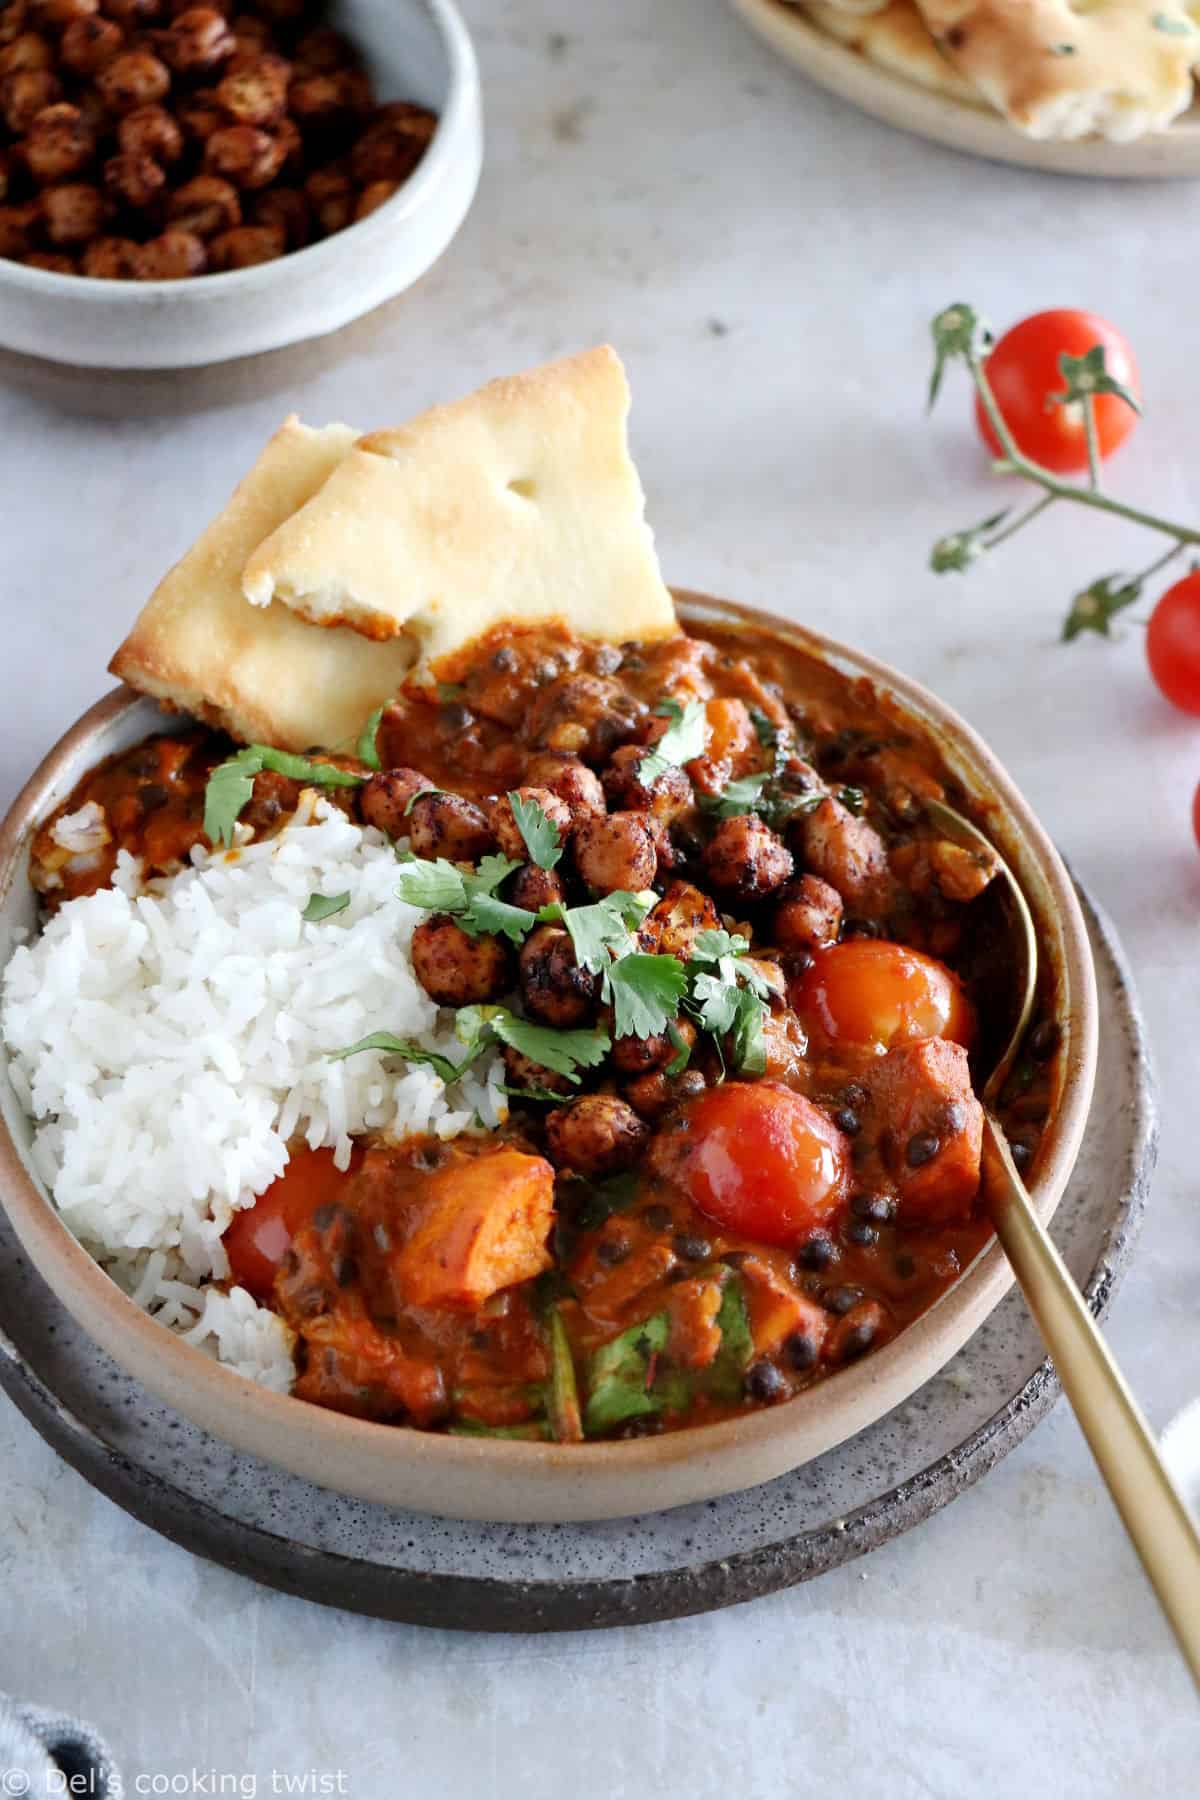 This lentil, chickpea and sweet potato curry is vegan, gluten-free, and a makes a great healthy weeknight meal.